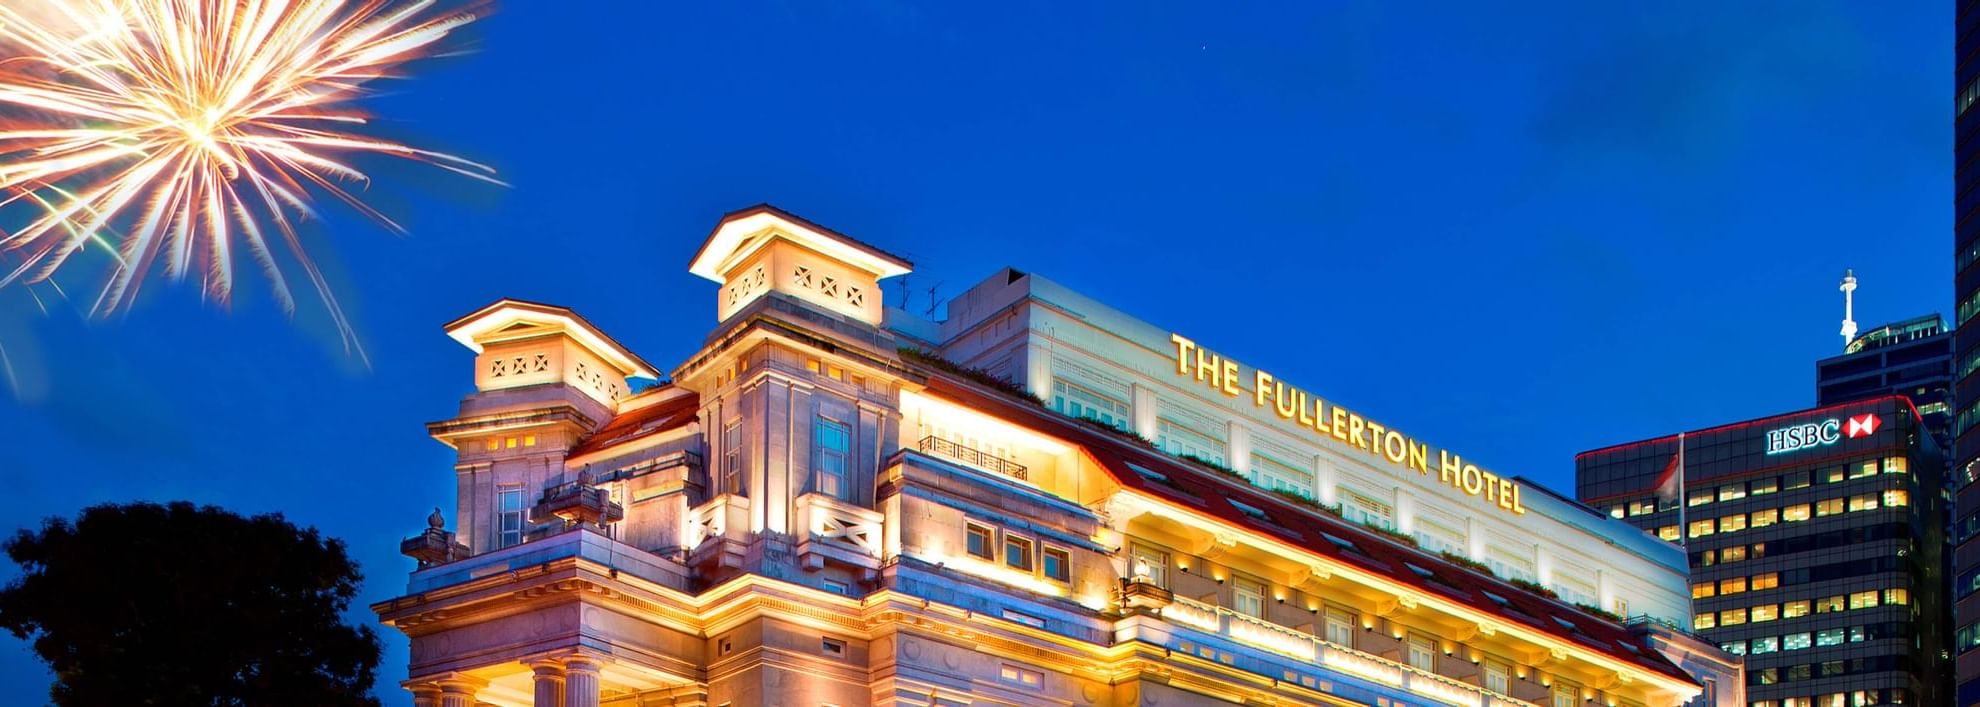 Exterior of The Fullerton Singapore with fireworks